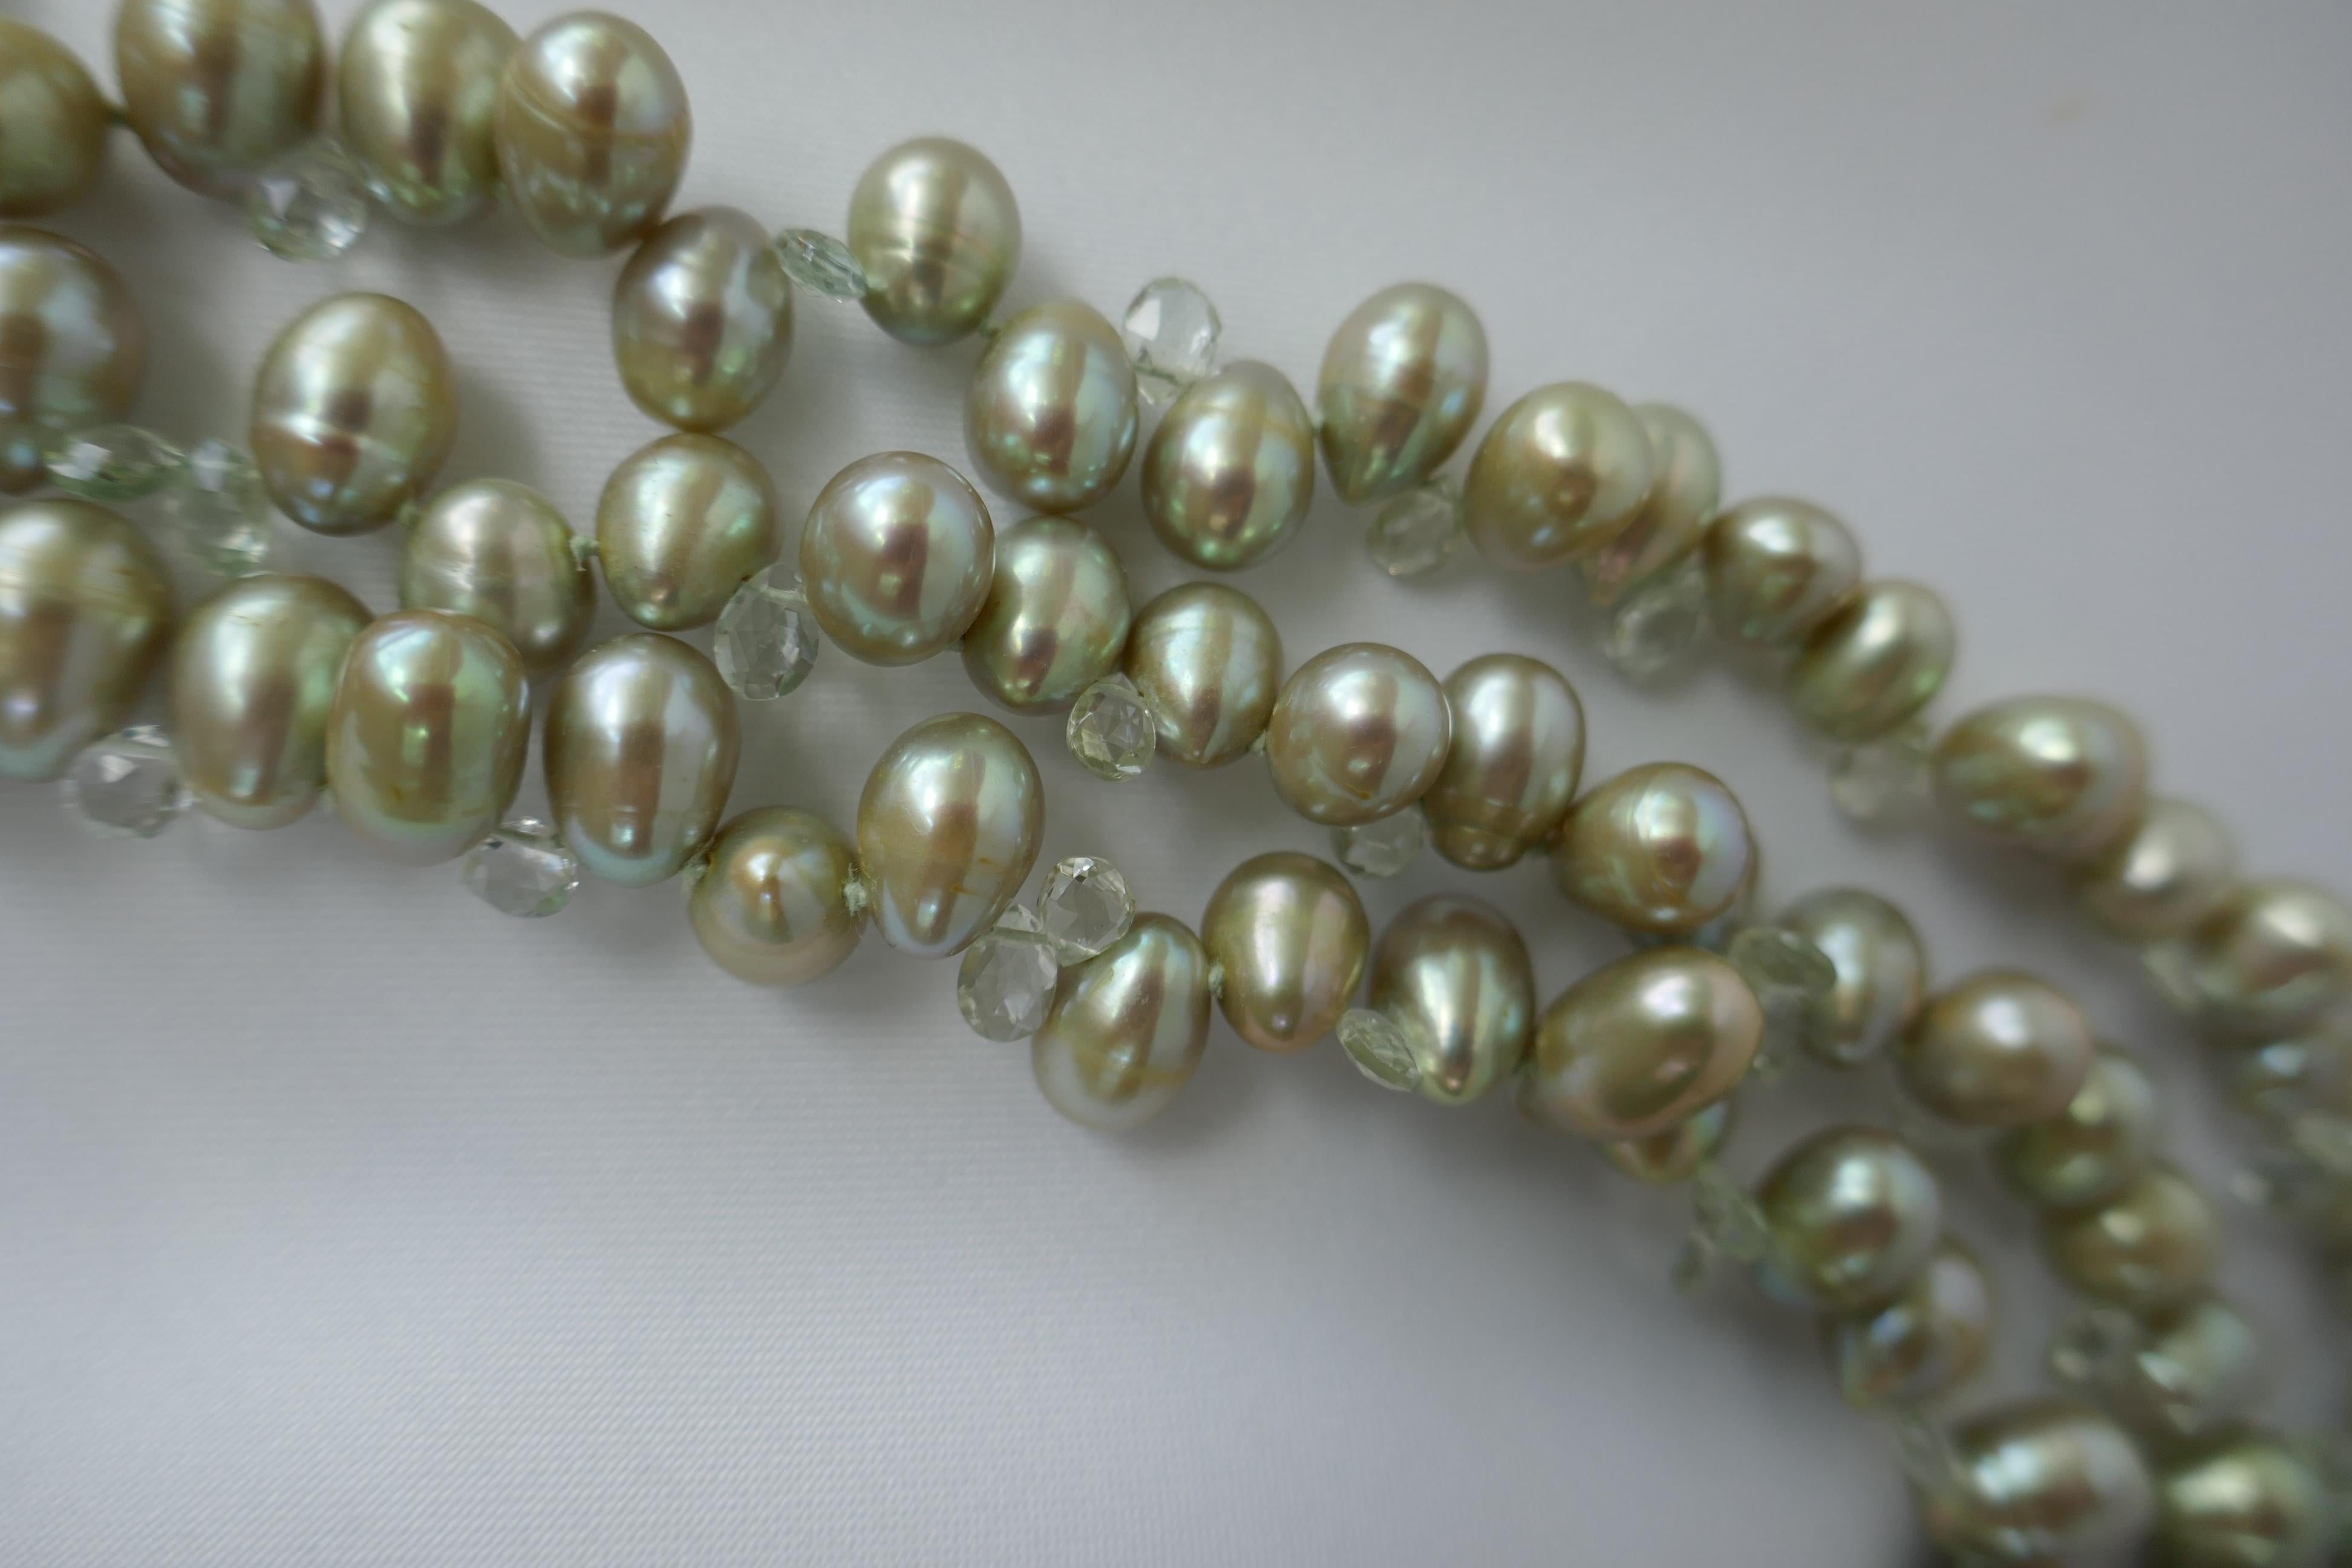 This three strand necklace is 8-8.5mm pale green drop cultured pearls interspersed with basket cut yellow beryl.  Beryl is a gemstone that comes is a variety of colors. The most well know are emerald, which when the beryl is deep green in color is